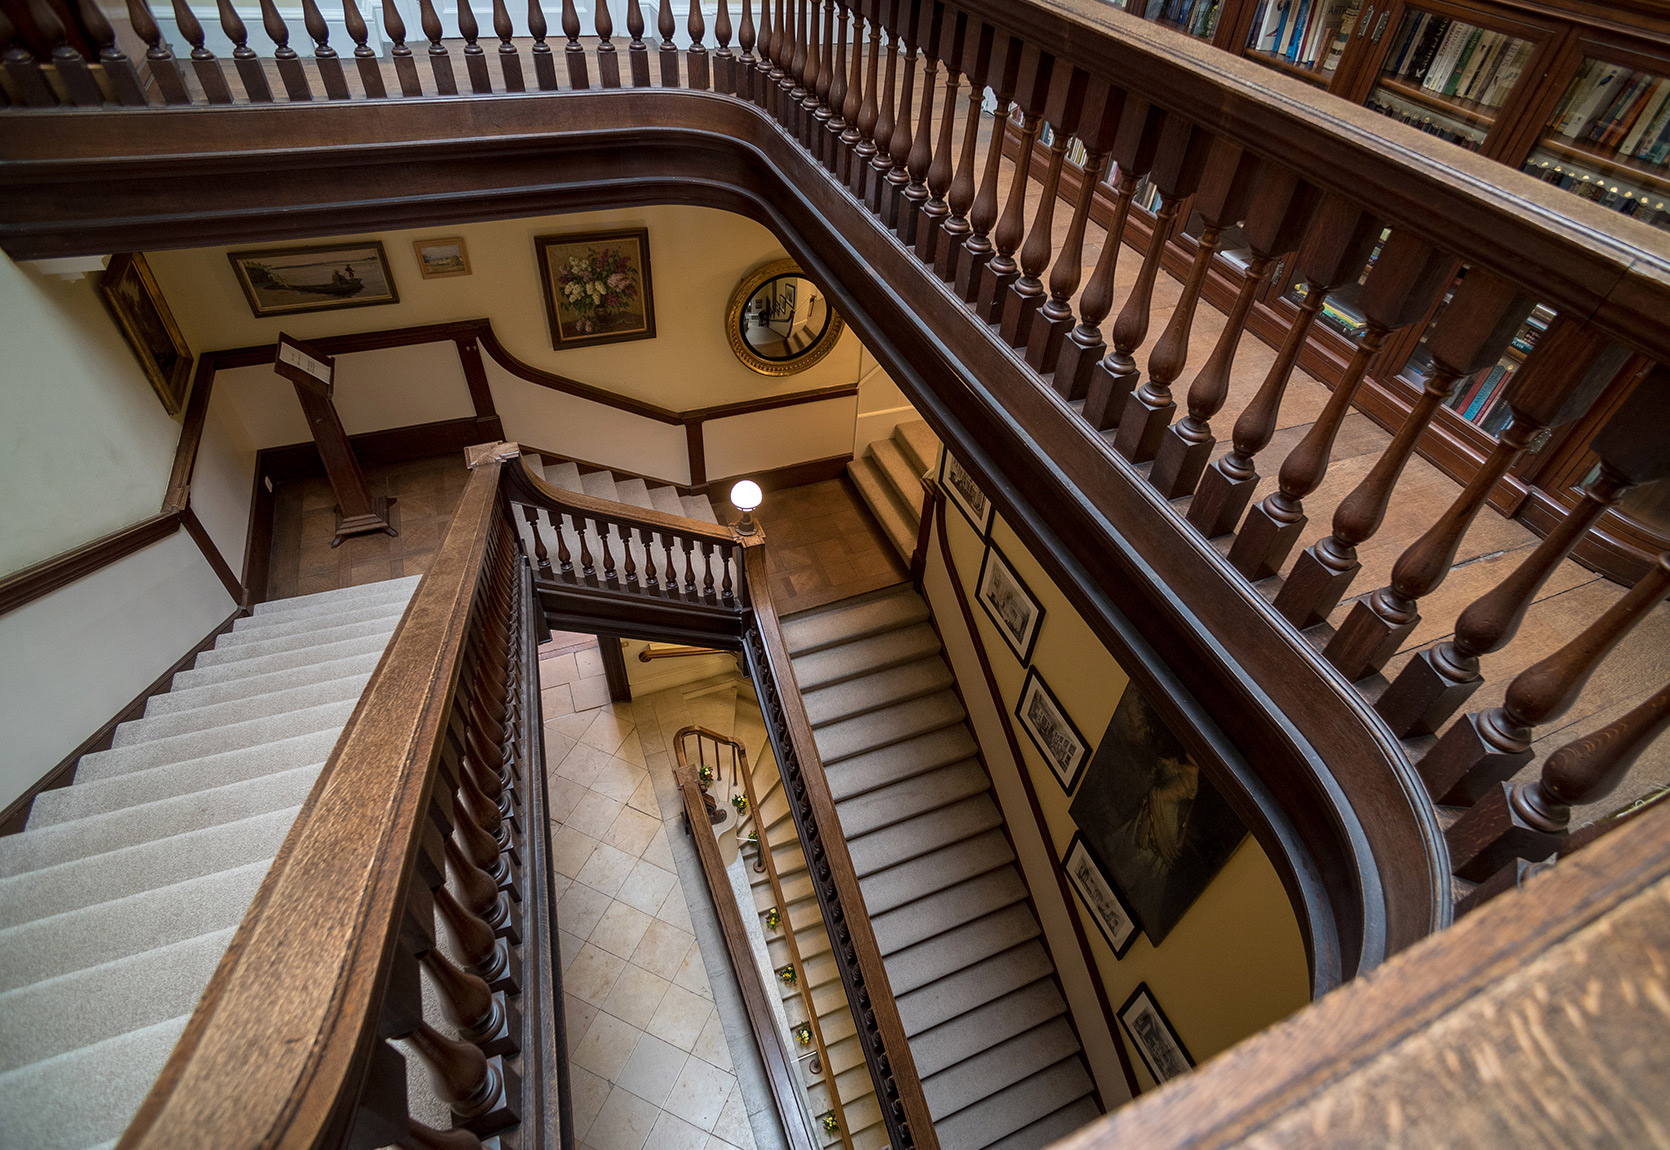 A winding, wooden Period staircase within Kirtlington Park house